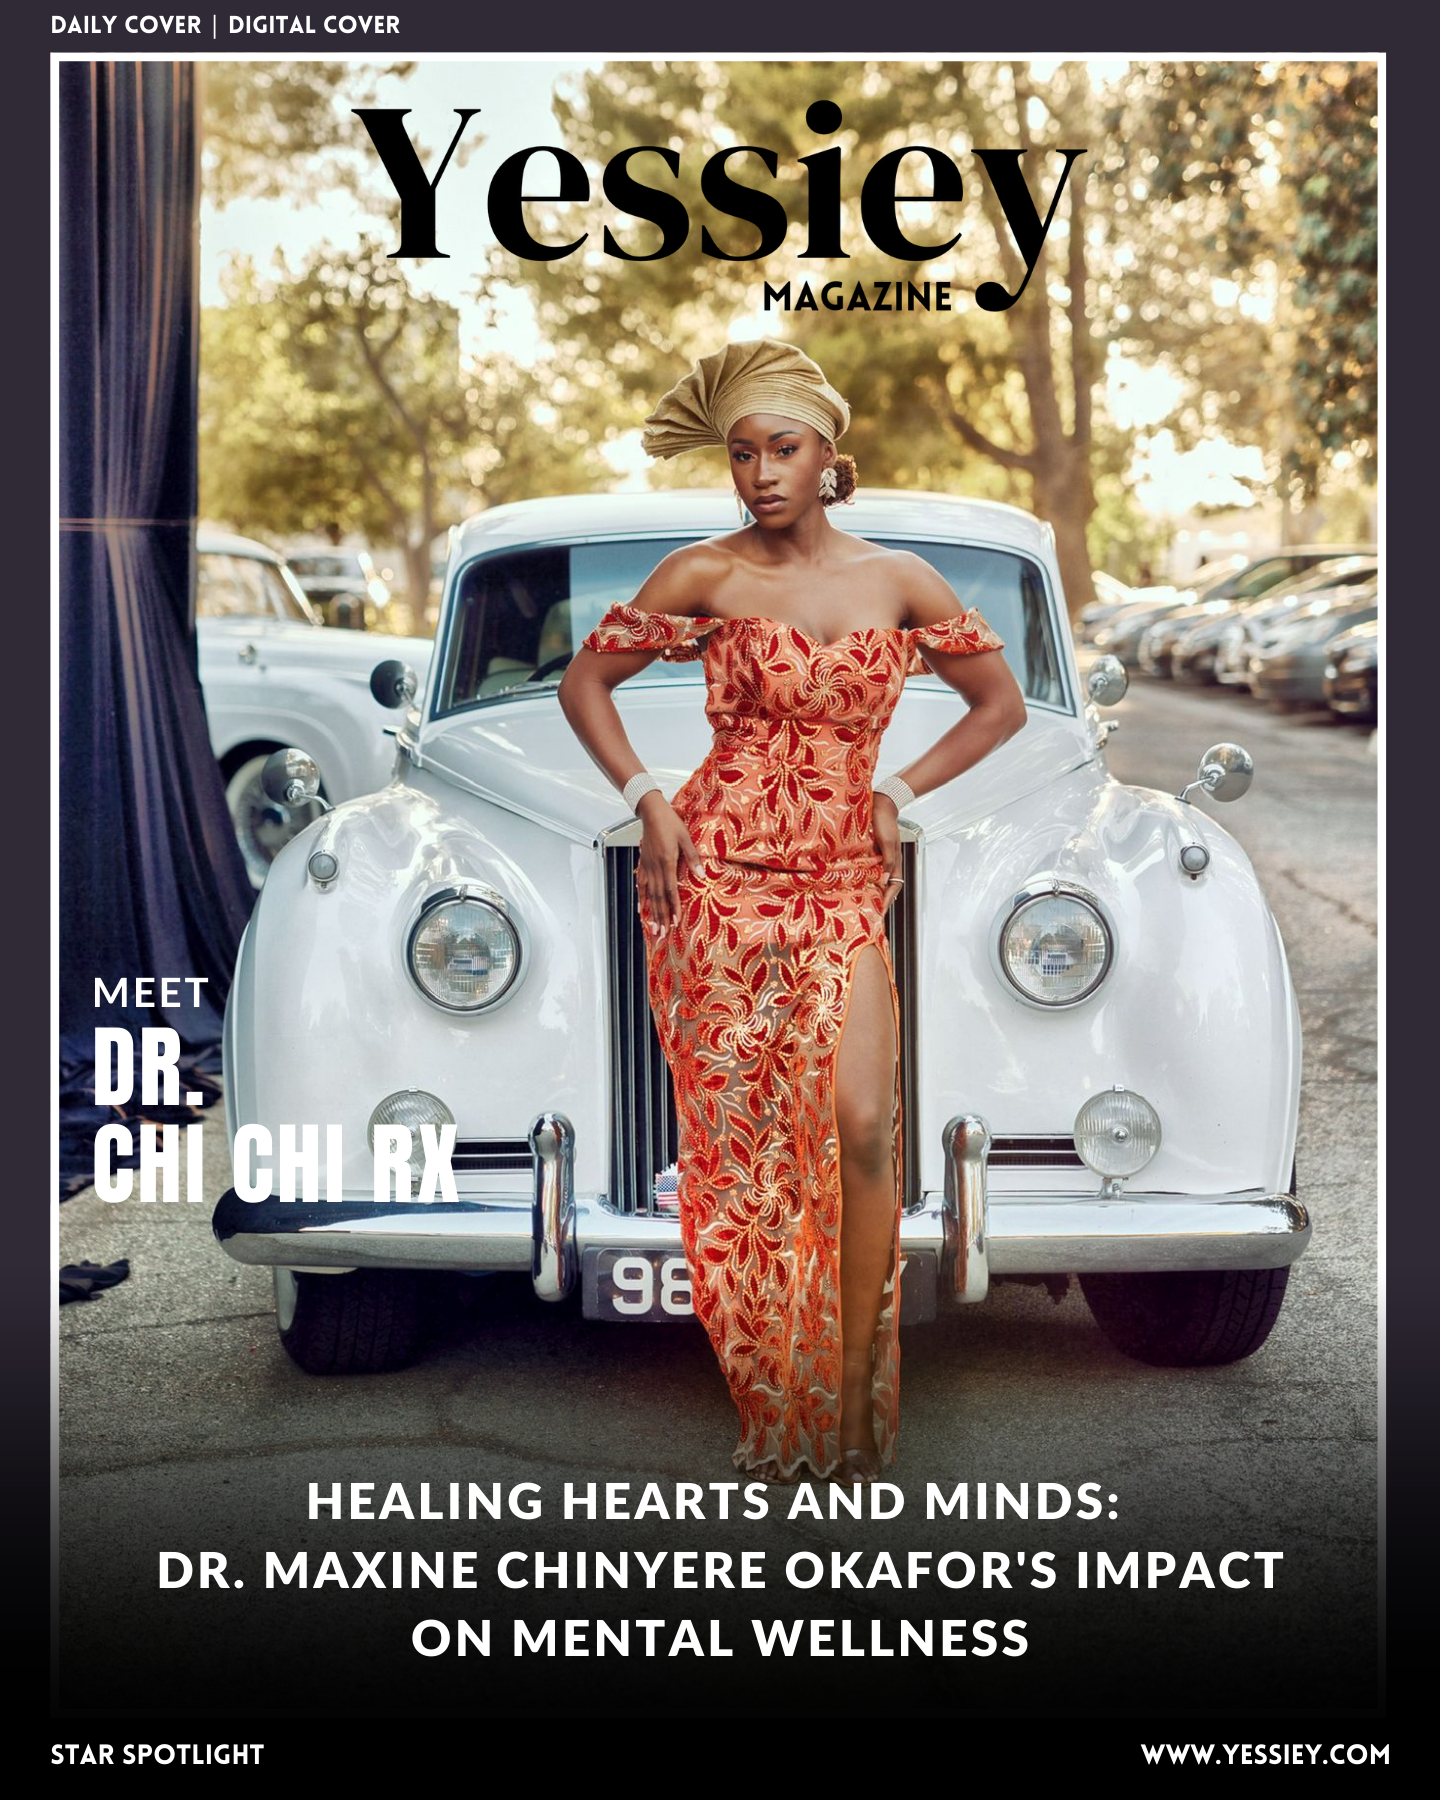 Dr. Maxine Chinyere Okafor